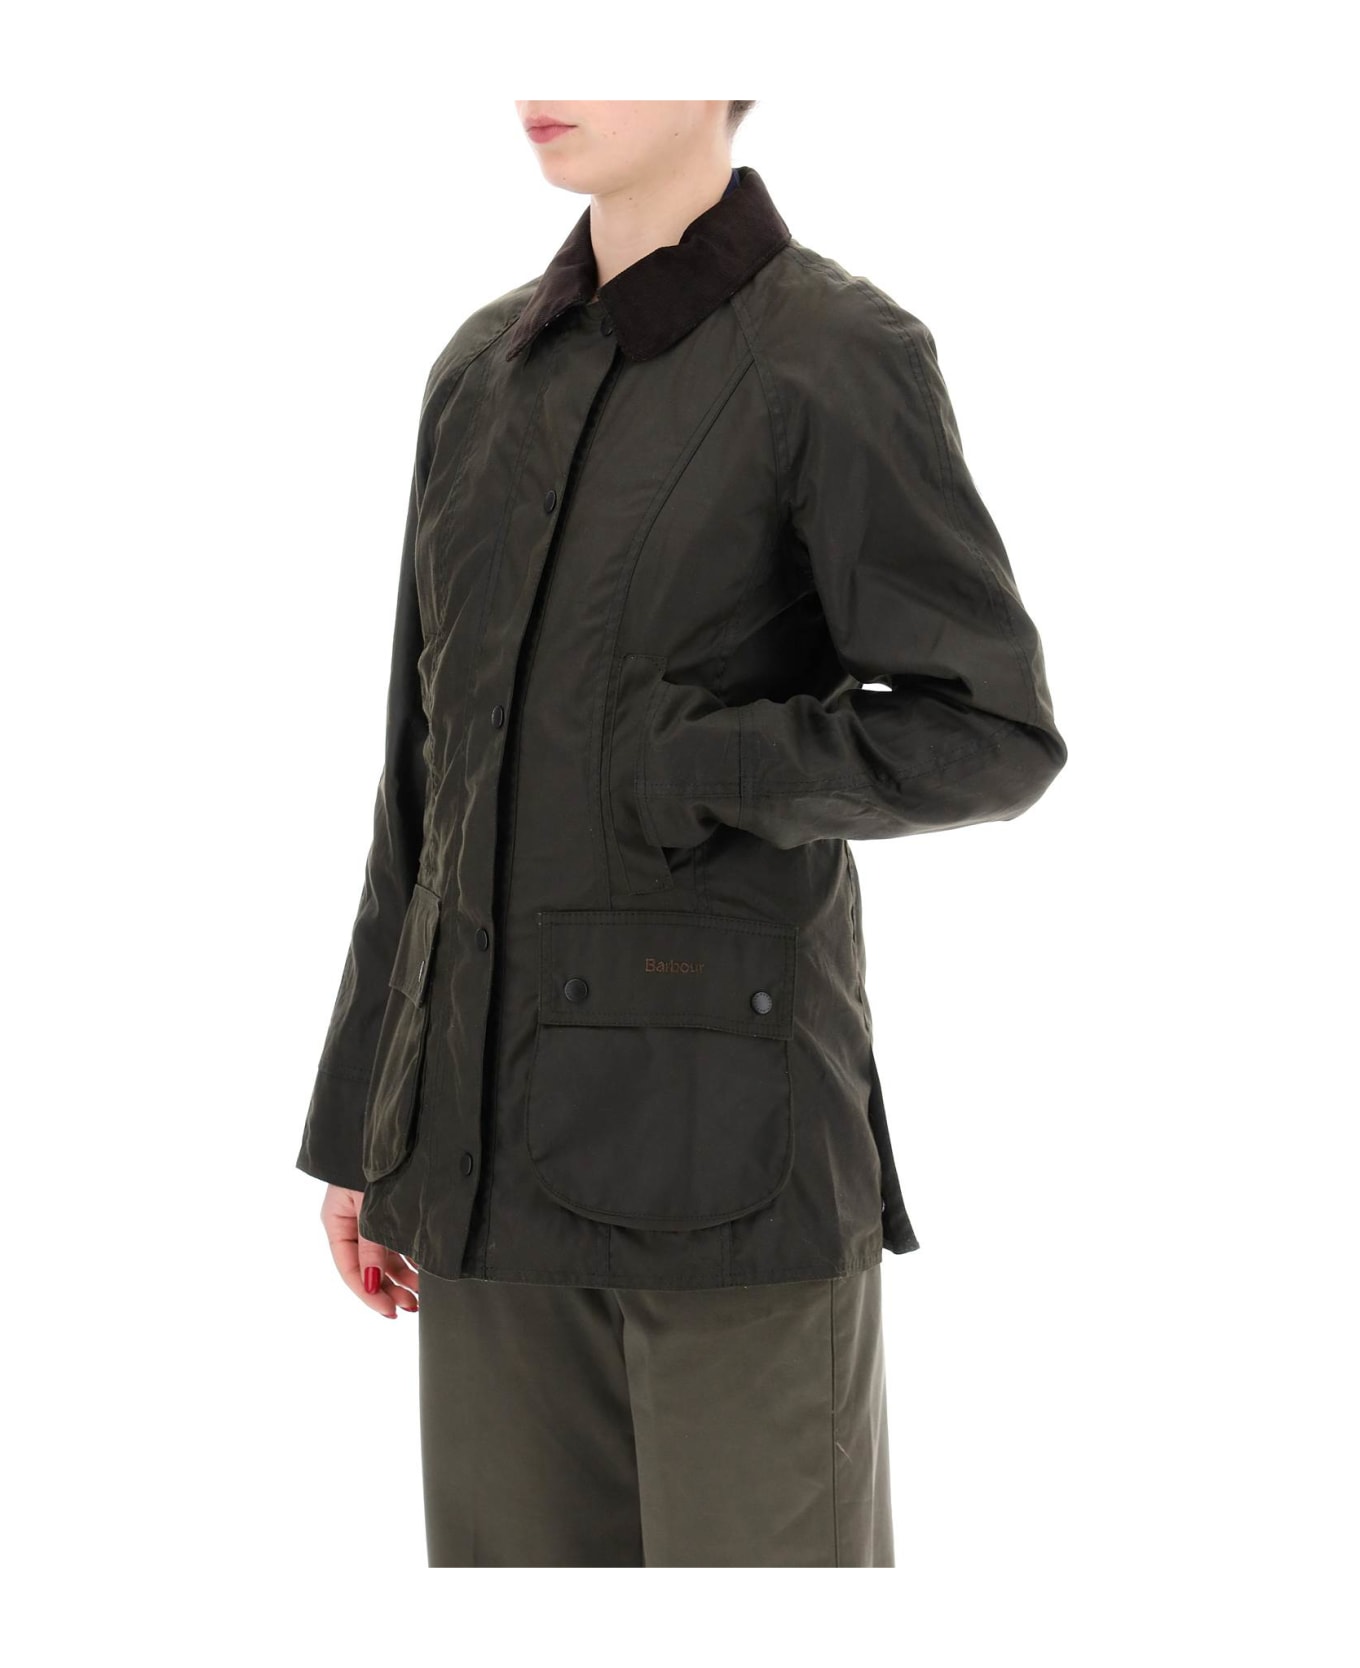 Barbour Brown Waxed Cotton Beadnell Jacket - Olive